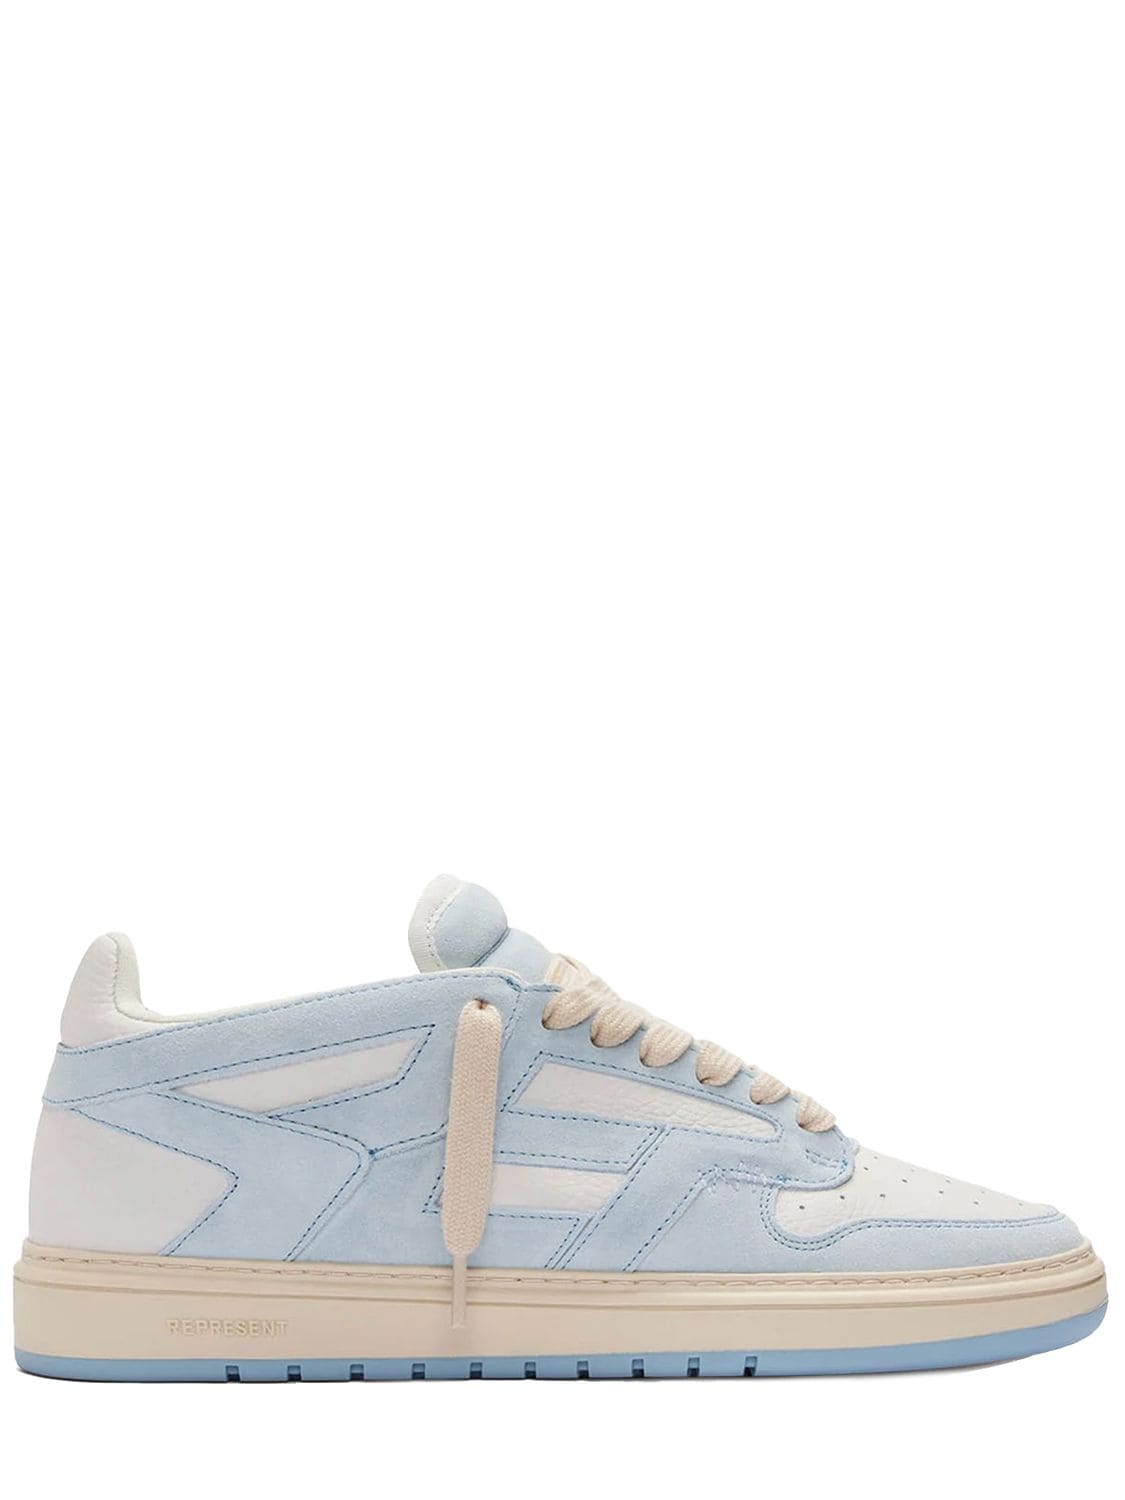 Shop Represent Reptor Low Leather Sneakers In Light Blue